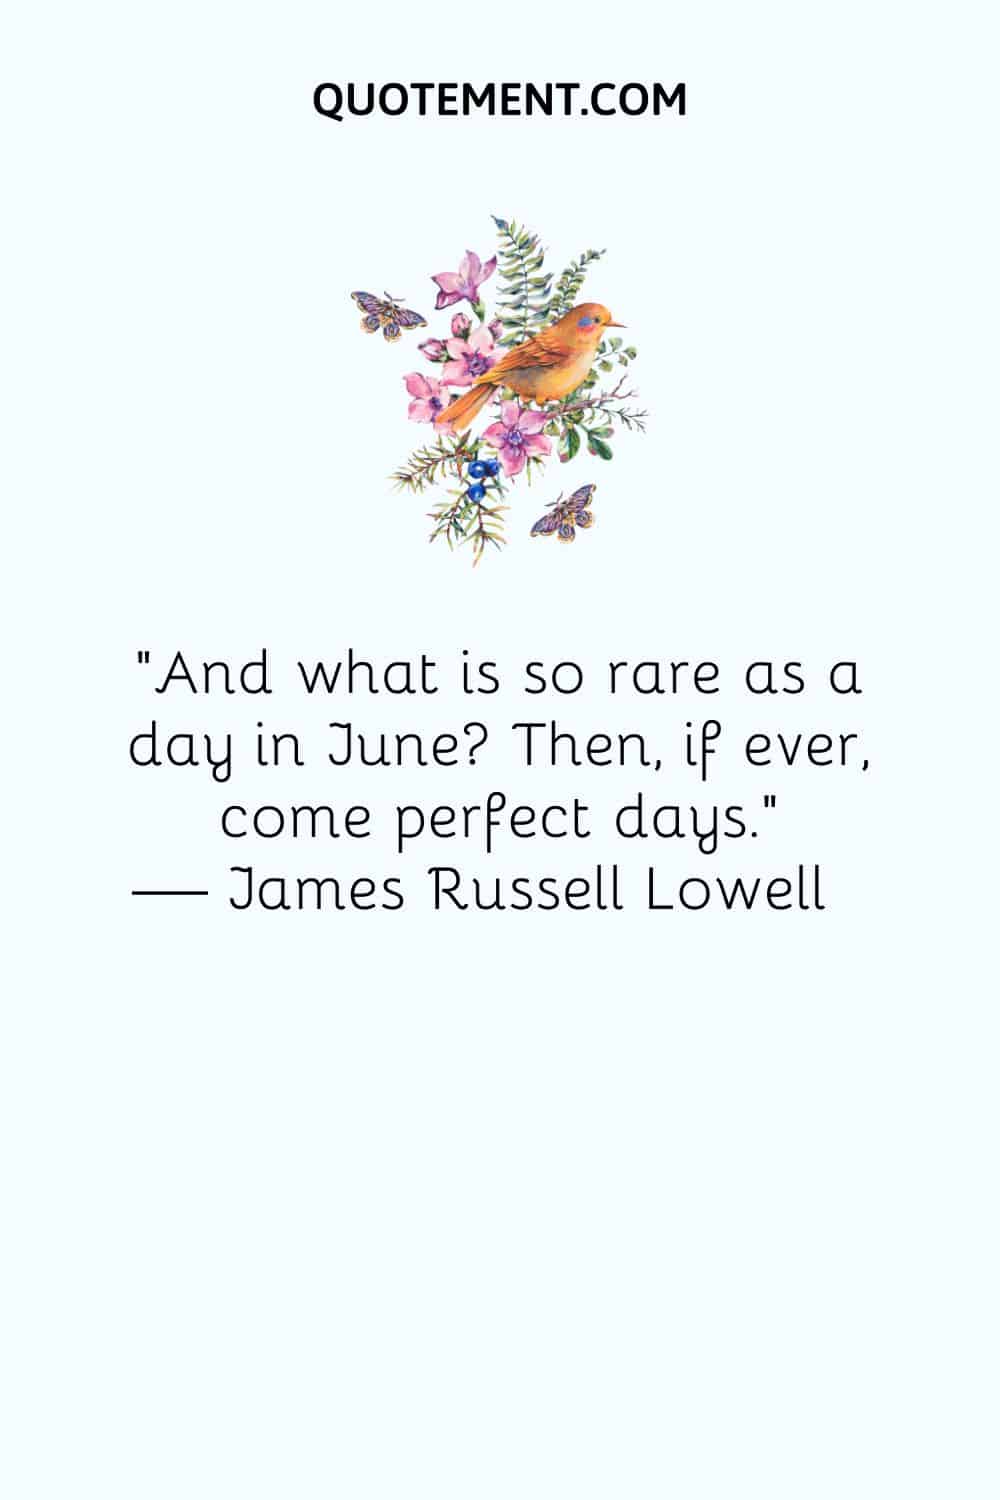 “And what is so rare as a day in June Then, if ever, come perfect days.” — James Russell Lowell